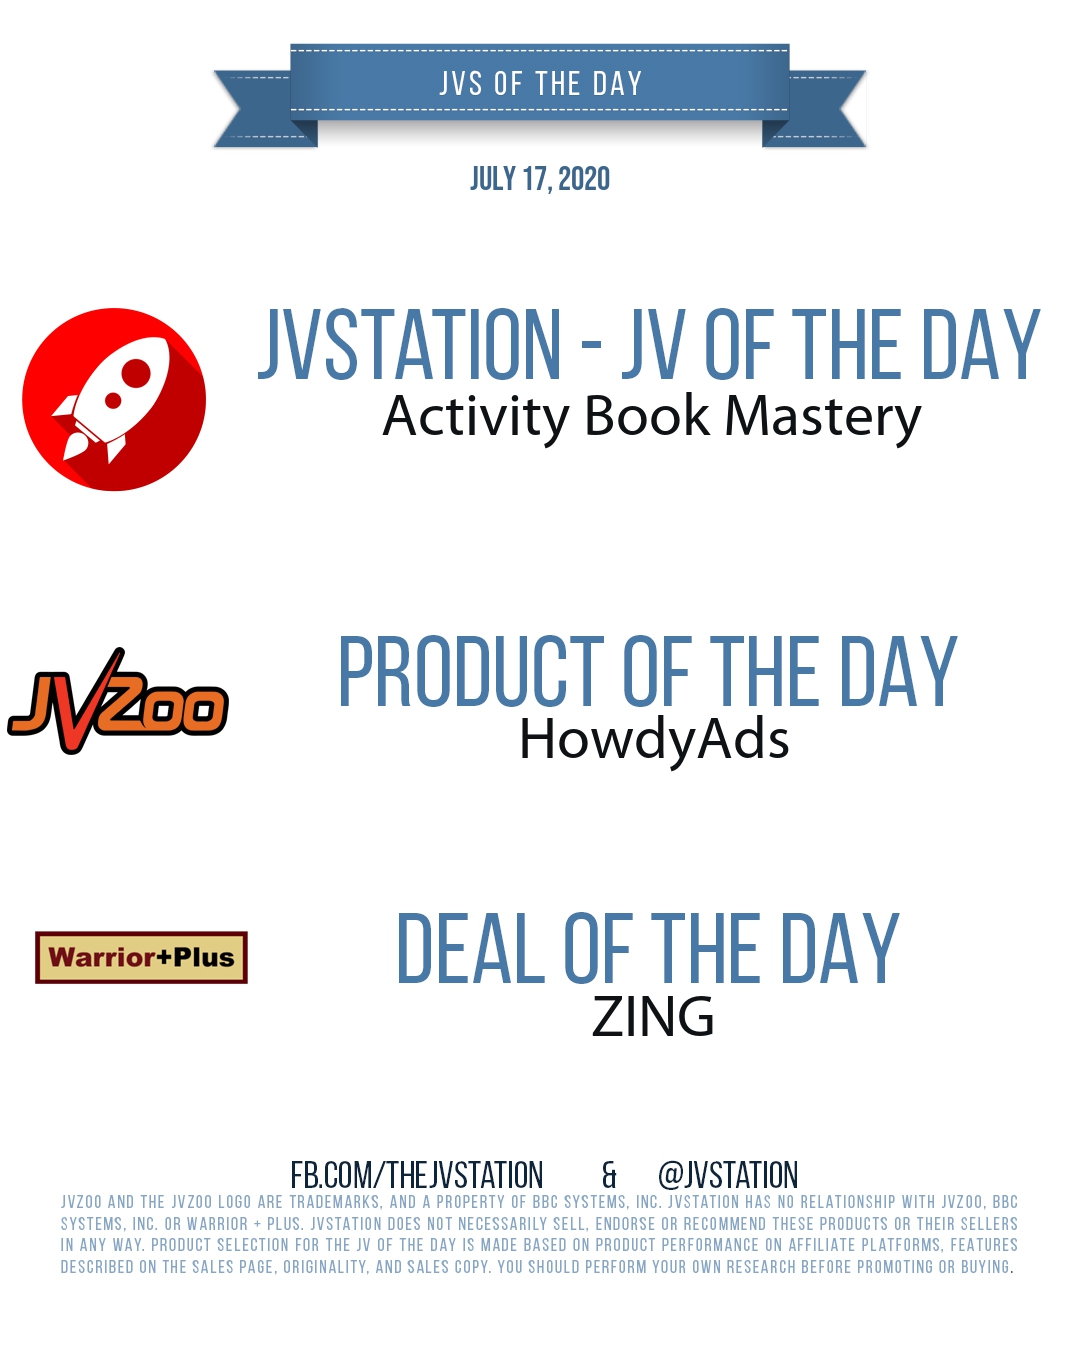 JVs of the day - July 17, 2020